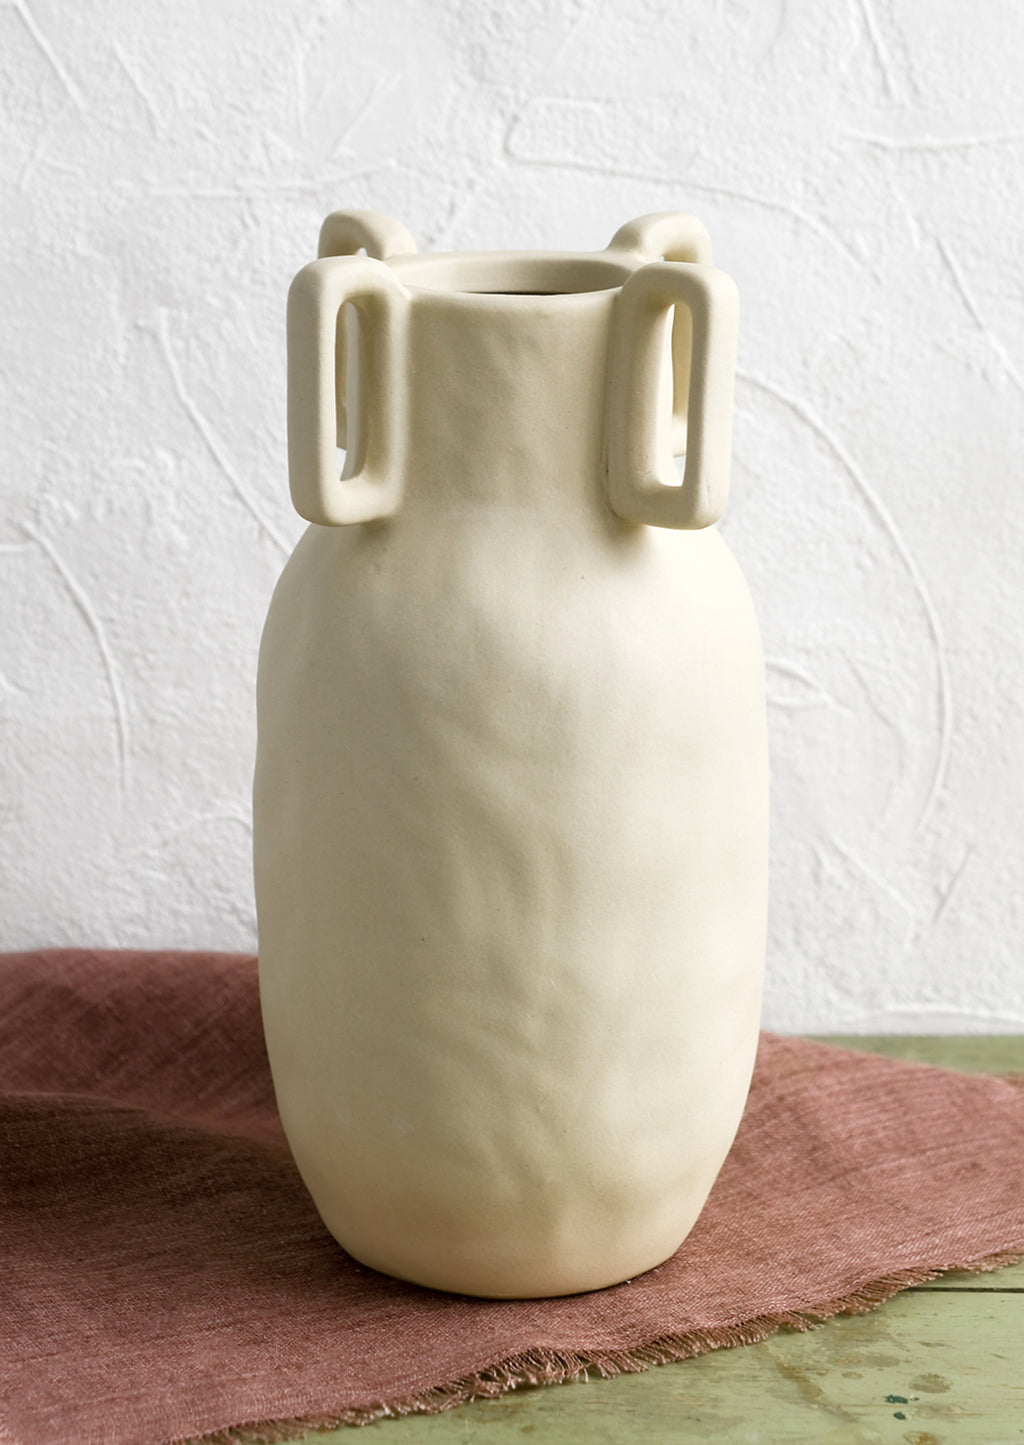 2: A sand color vase in matte ceramic with decorative square handle detail around mouth.